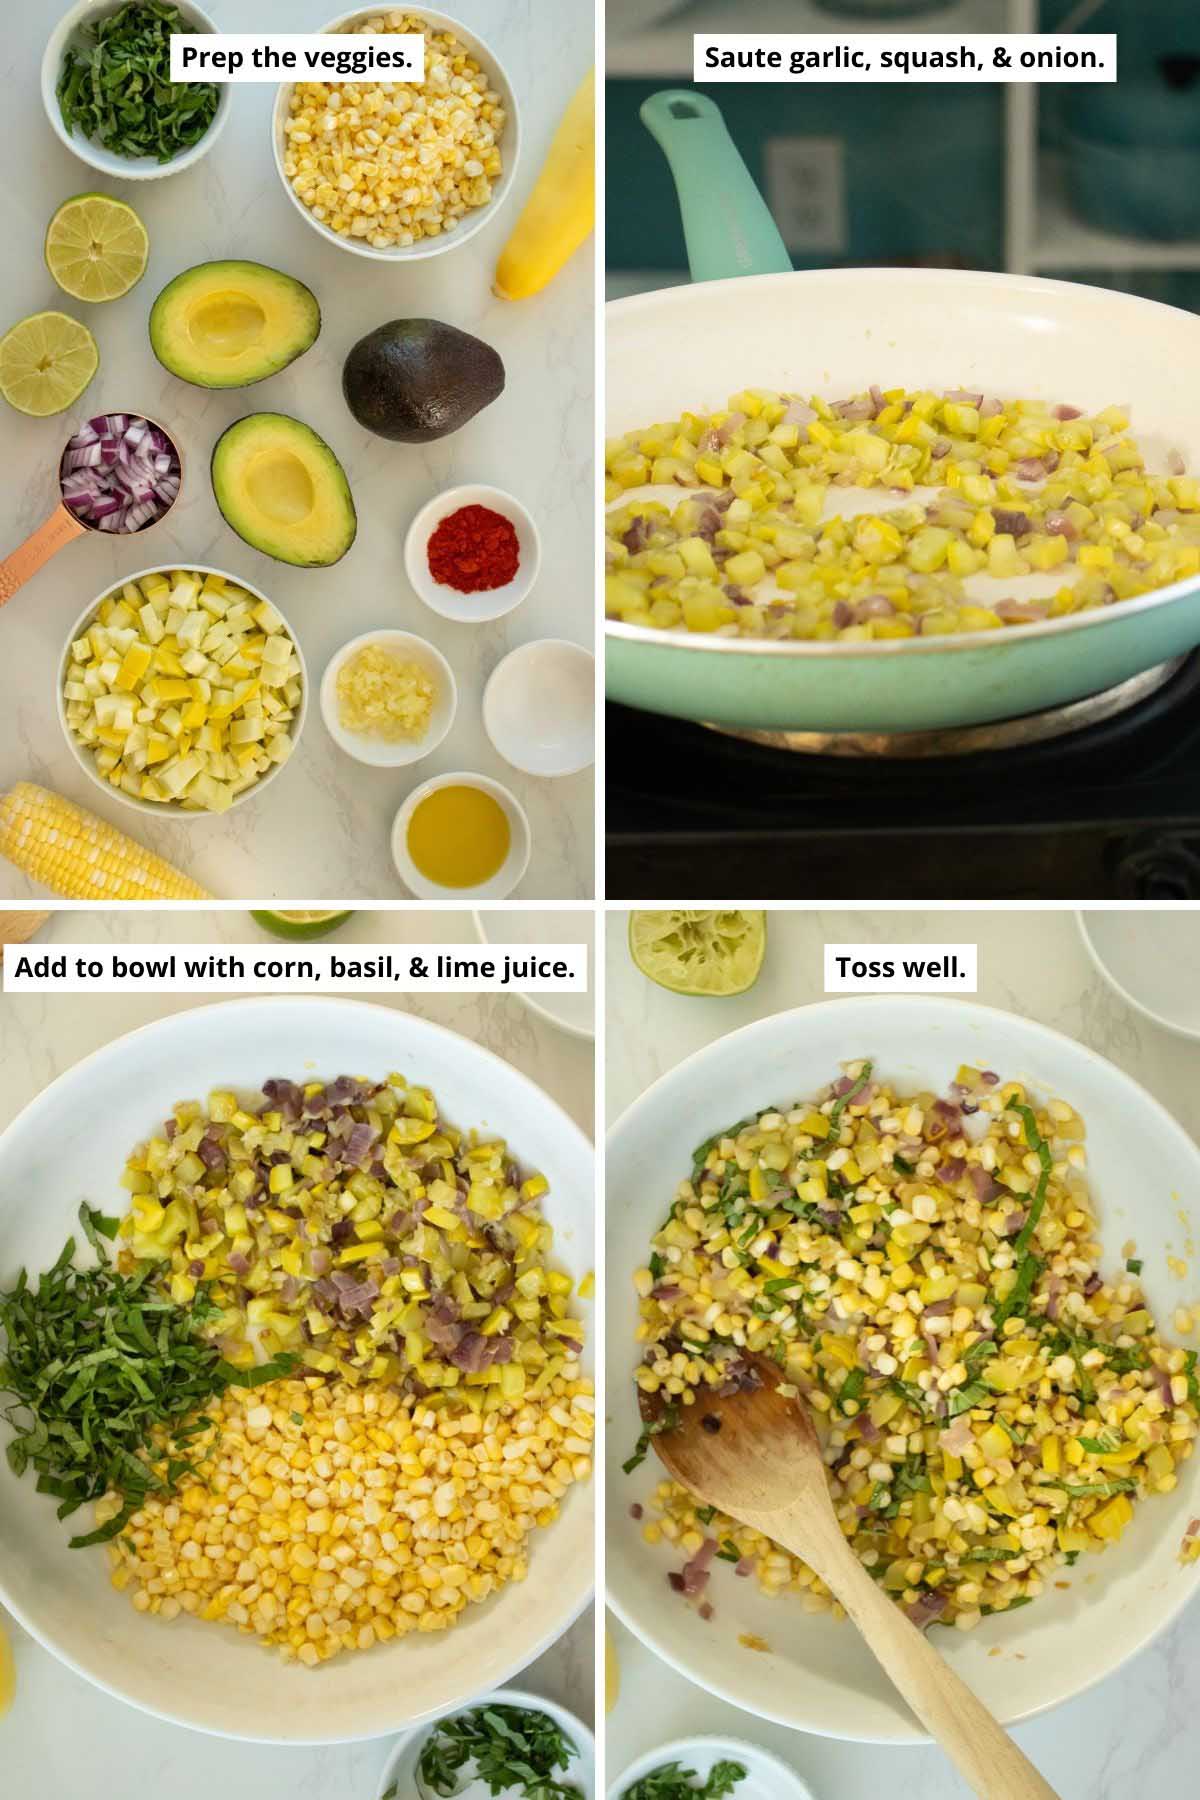 image collage showing prepped ingredients, the sauteed squash mixture in the pan, and the stuffed avocado filling before and after tossing together in a bowl